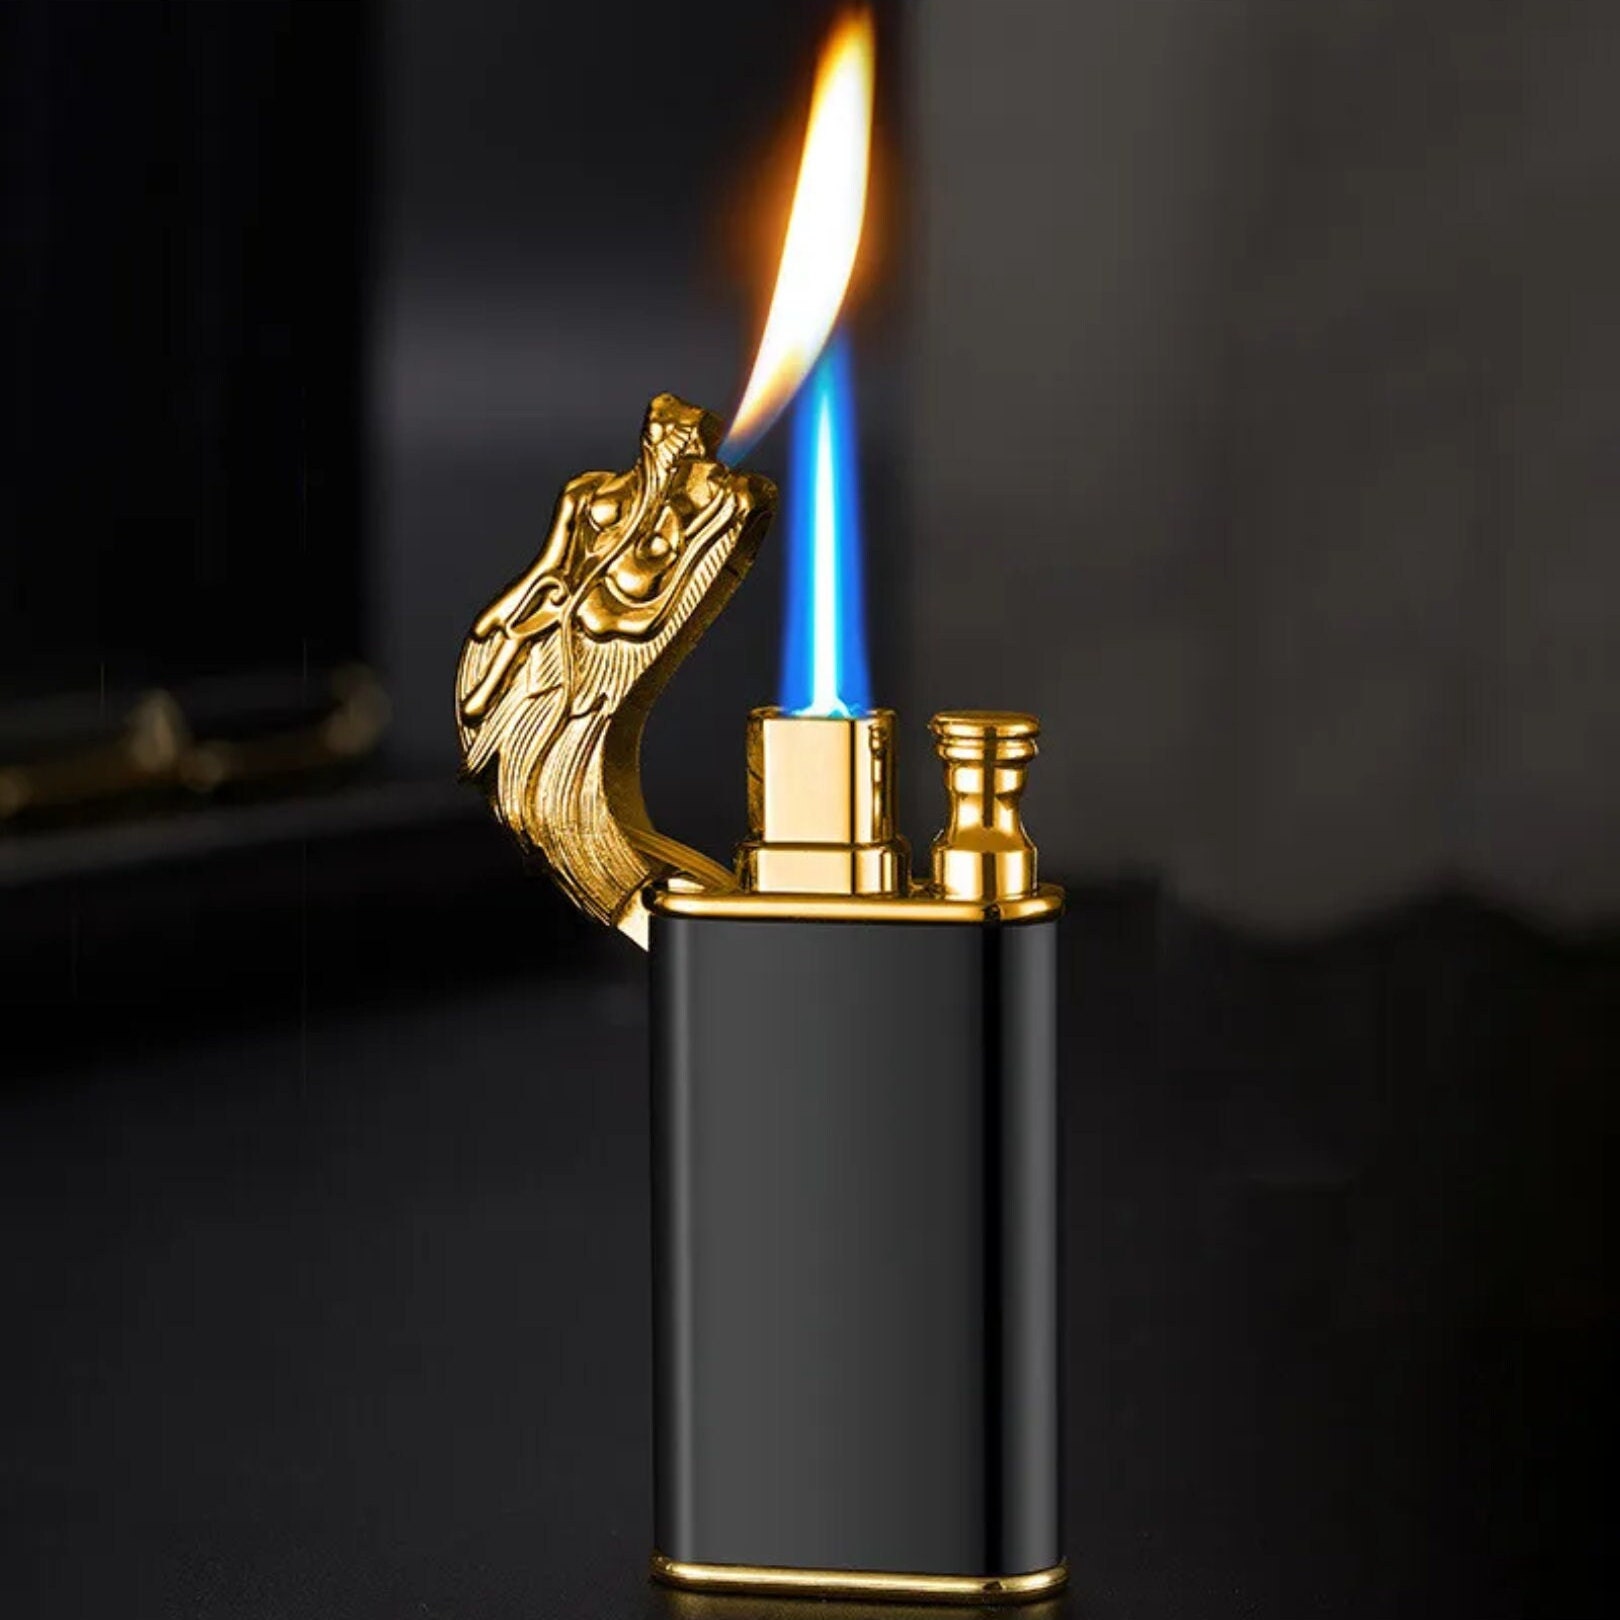 Lull Ligner Agnes Gray Buy Dragon Lighter With Duel Flame Dragon Double Fire Torch Online in India  - Etsy